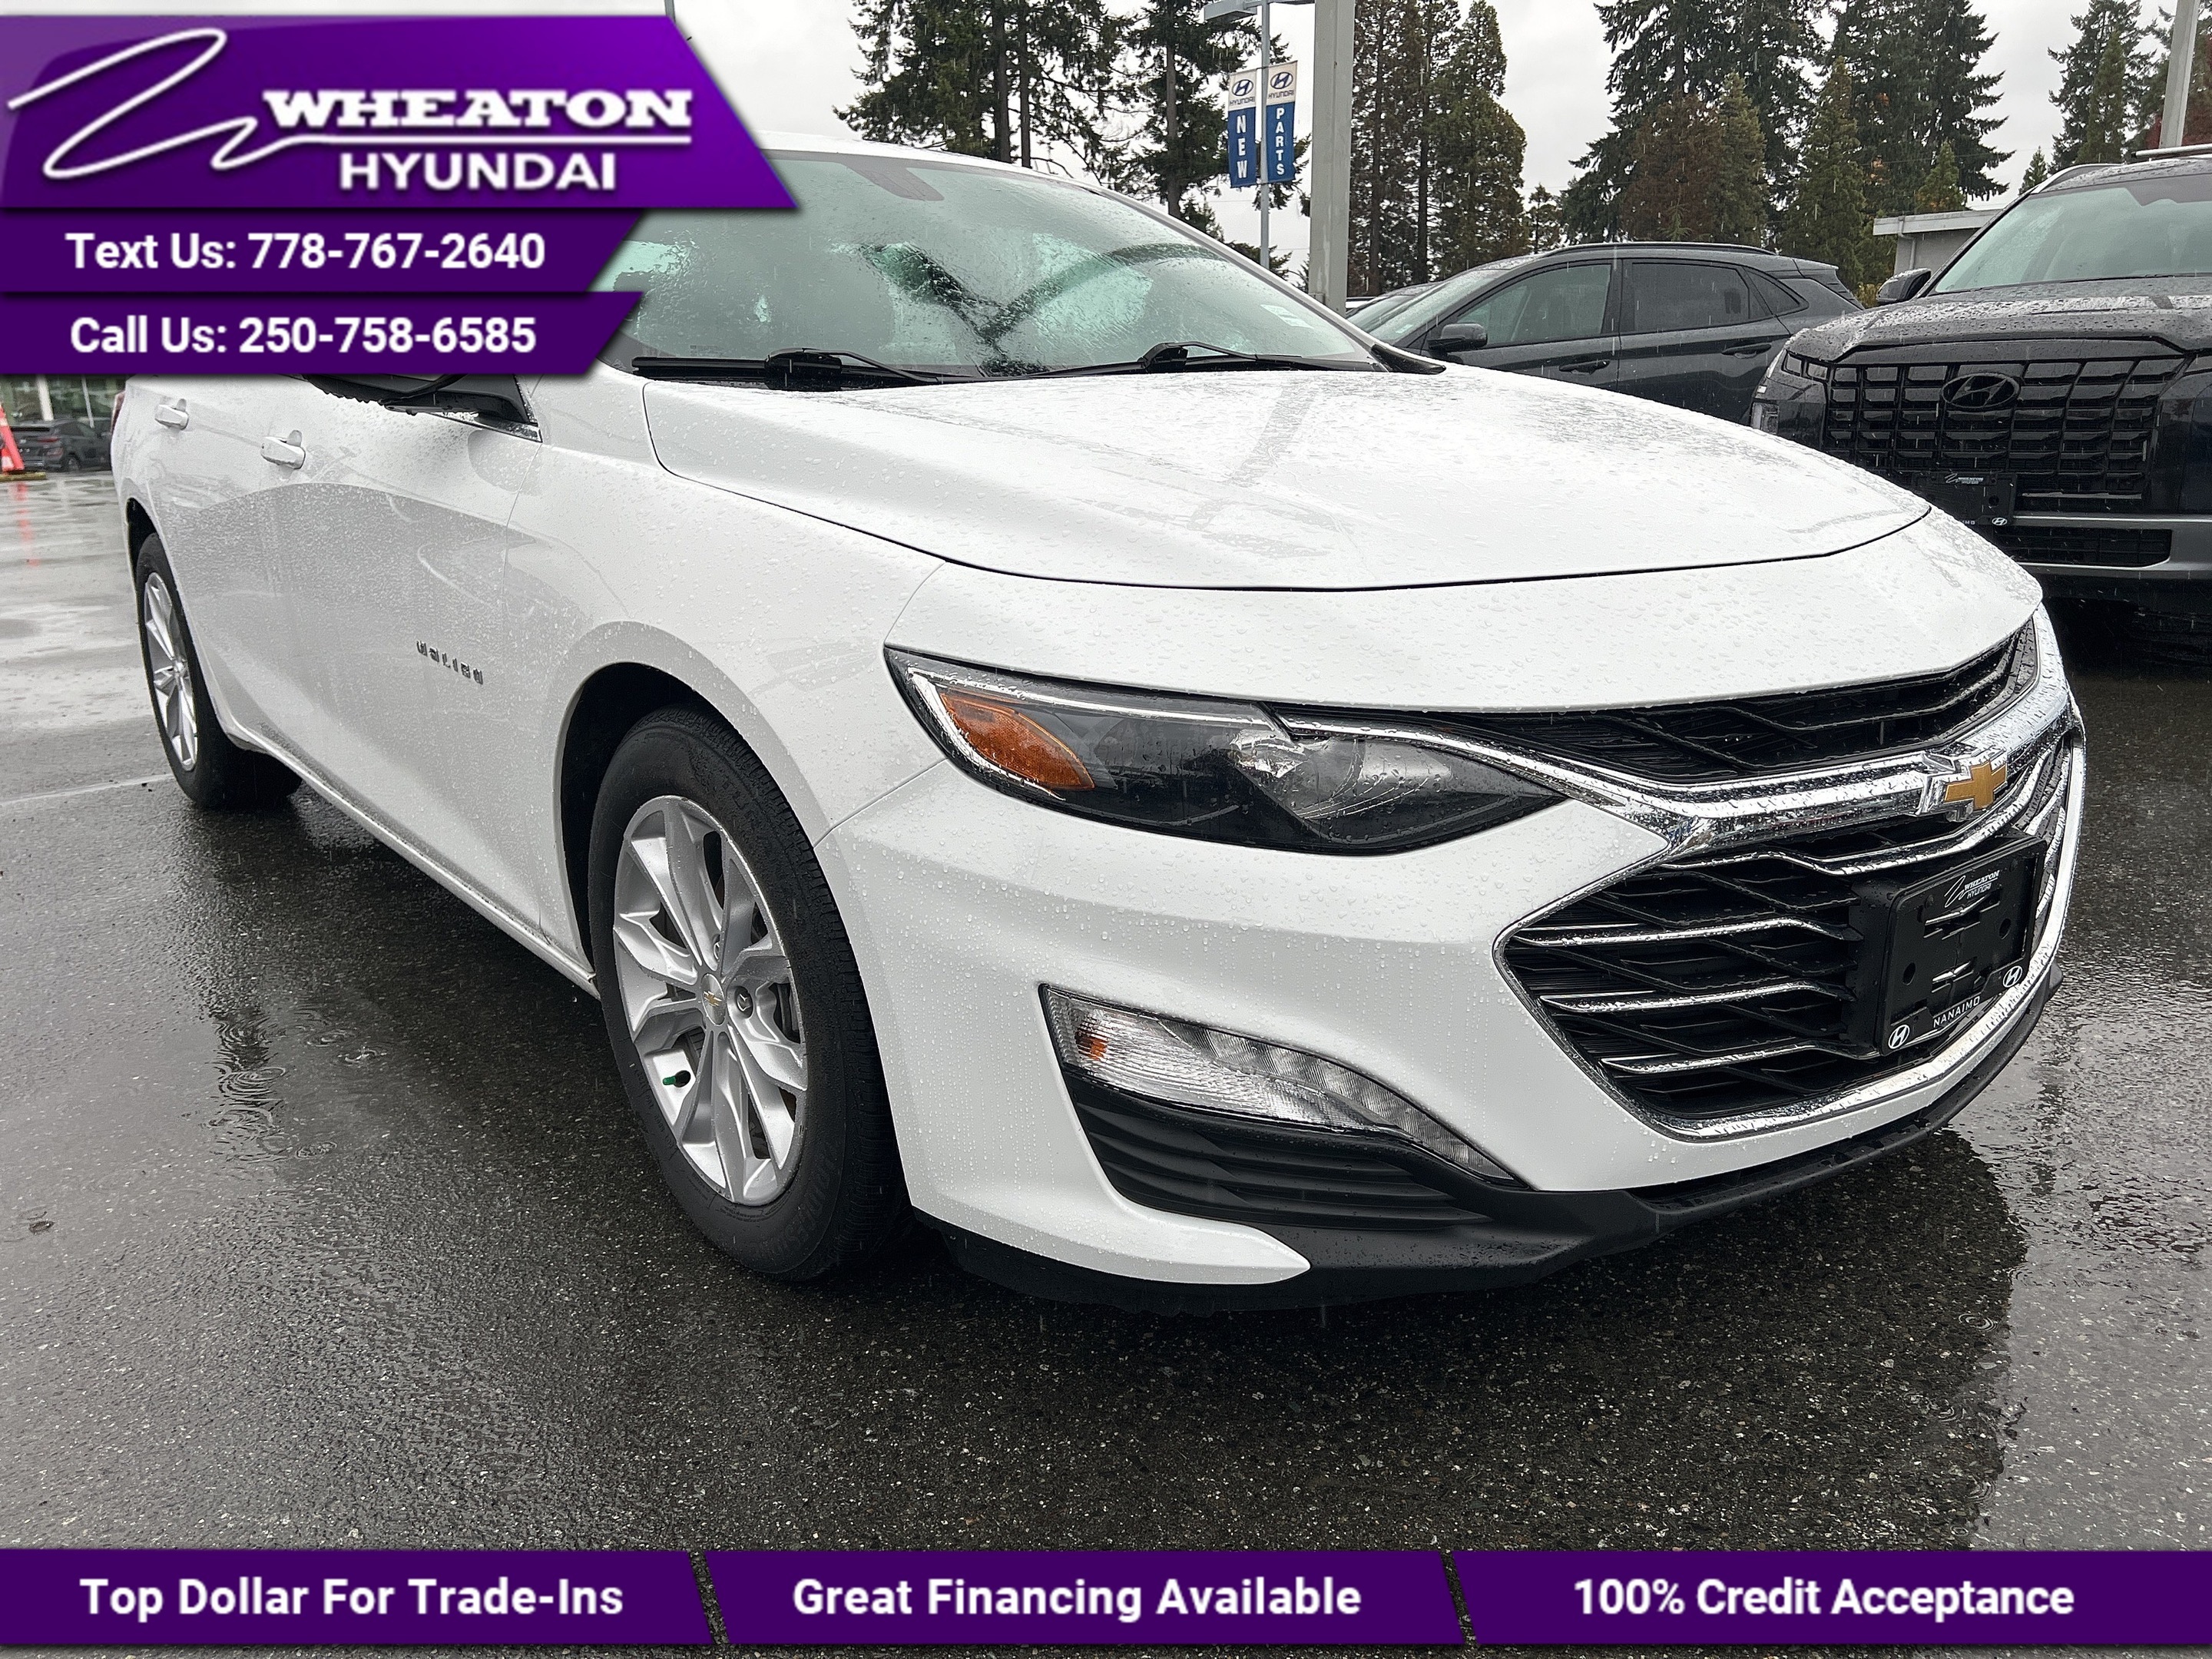 2019 Chevrolet Malibu LT, Trade in, Heated Seats, Touch Screen, Back Up 